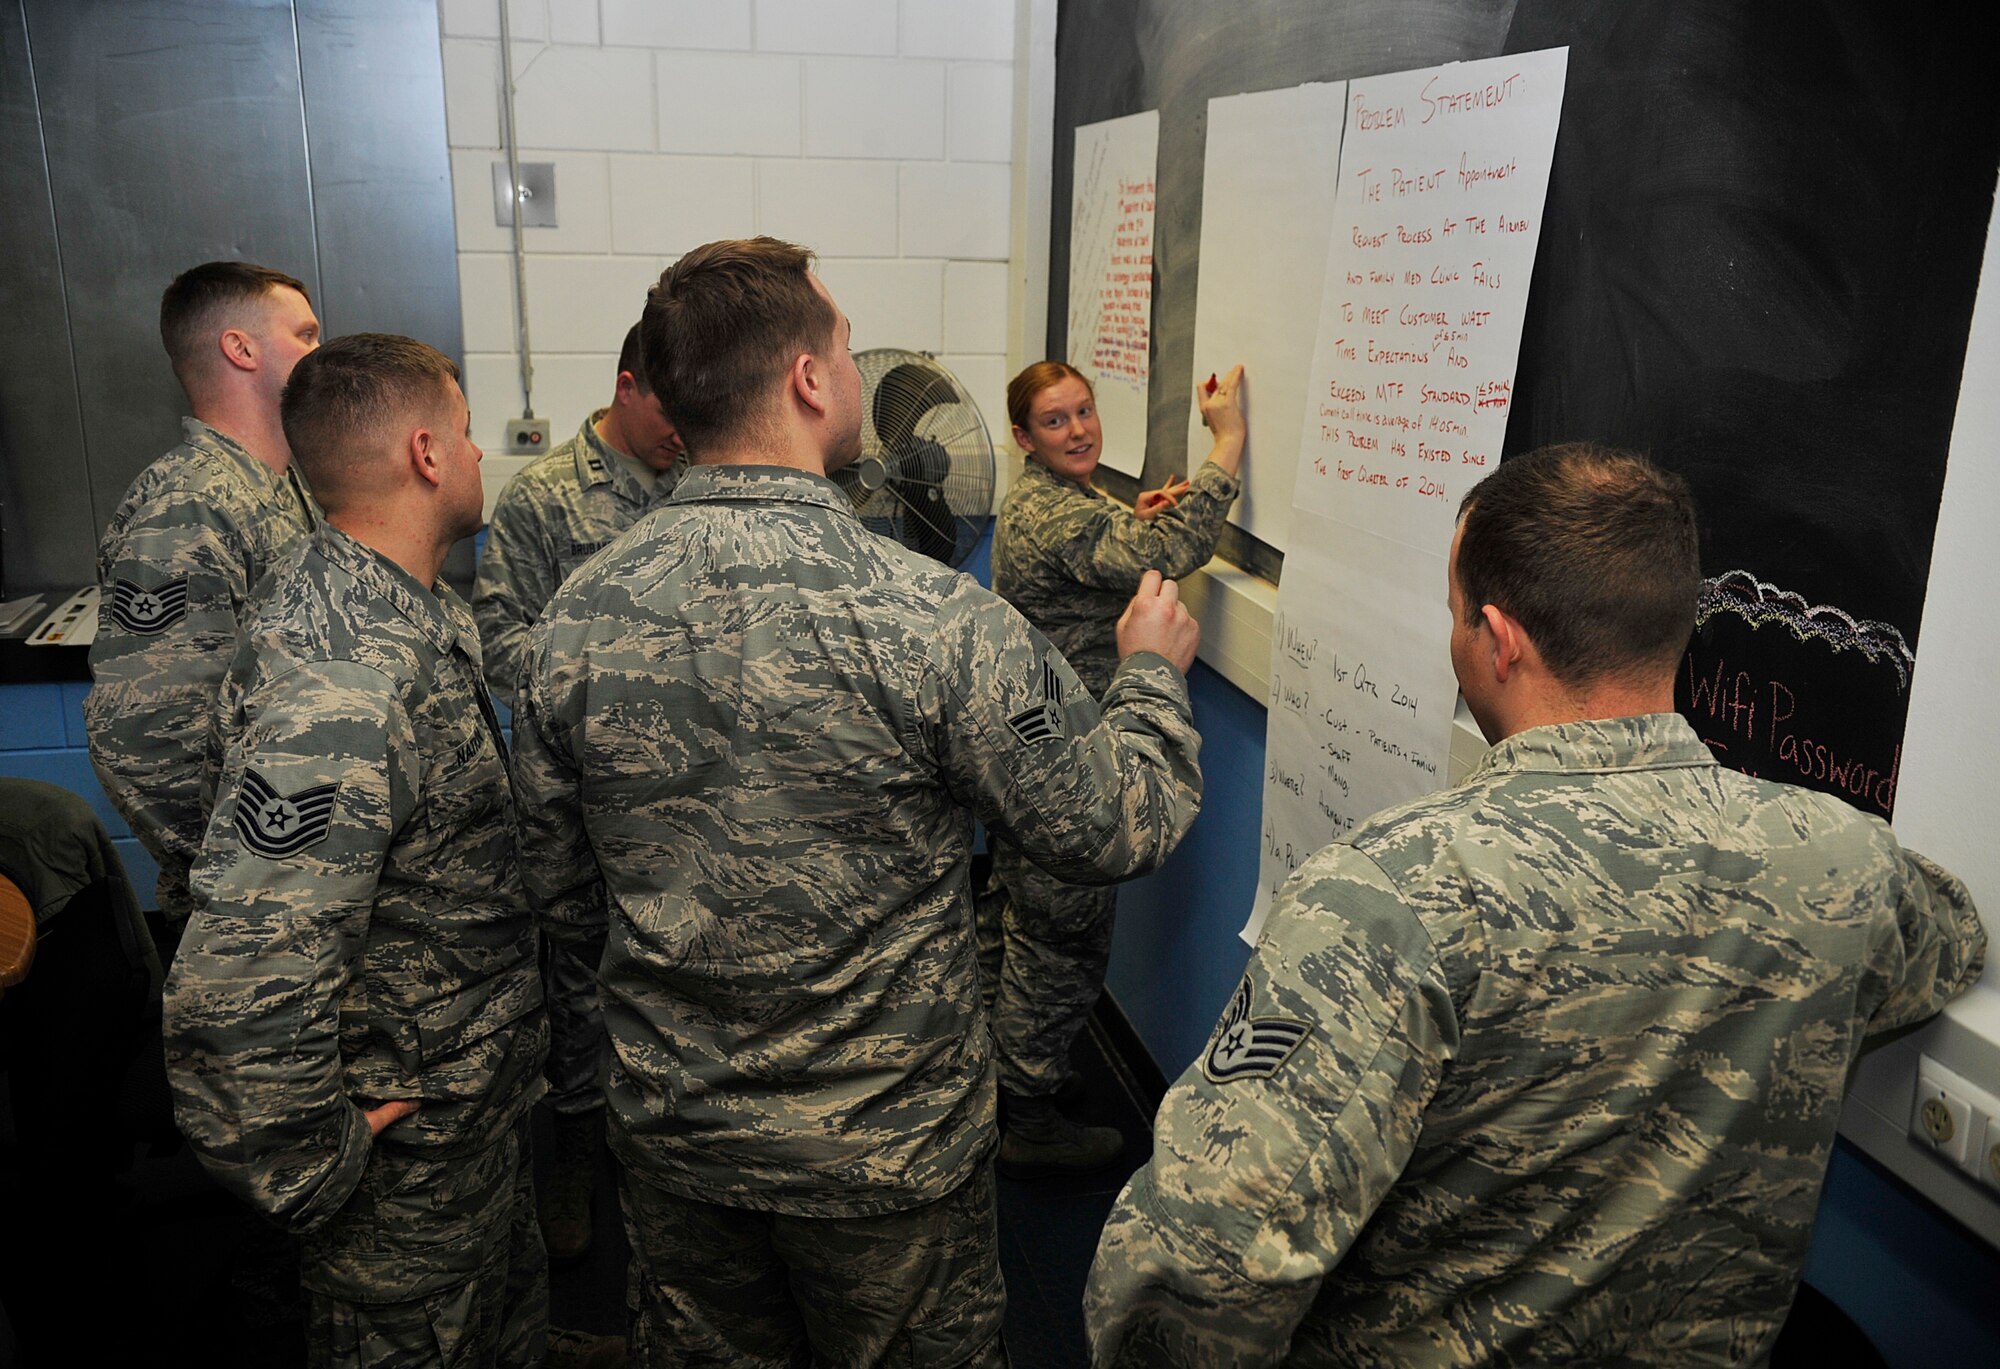 Airmen from the 86th Airlift Wing solve a simulated problem during Problem Identification Training Jan. 12, 2016, at Ramstein Air Base, Germany. PIT is available to all Airmen and gives them the opportunity to learn problem-solving skills and in turn, help them come up with innovative ways to better processes in their individual units. Wings across the U.S. Air Forces in Europe Air Forces Africa are preparing for Innovation Madness 2016, which helps build an innovation culture year-round. (U.S. Air Force photo/Airman 1st Class Larissa Greatwood)